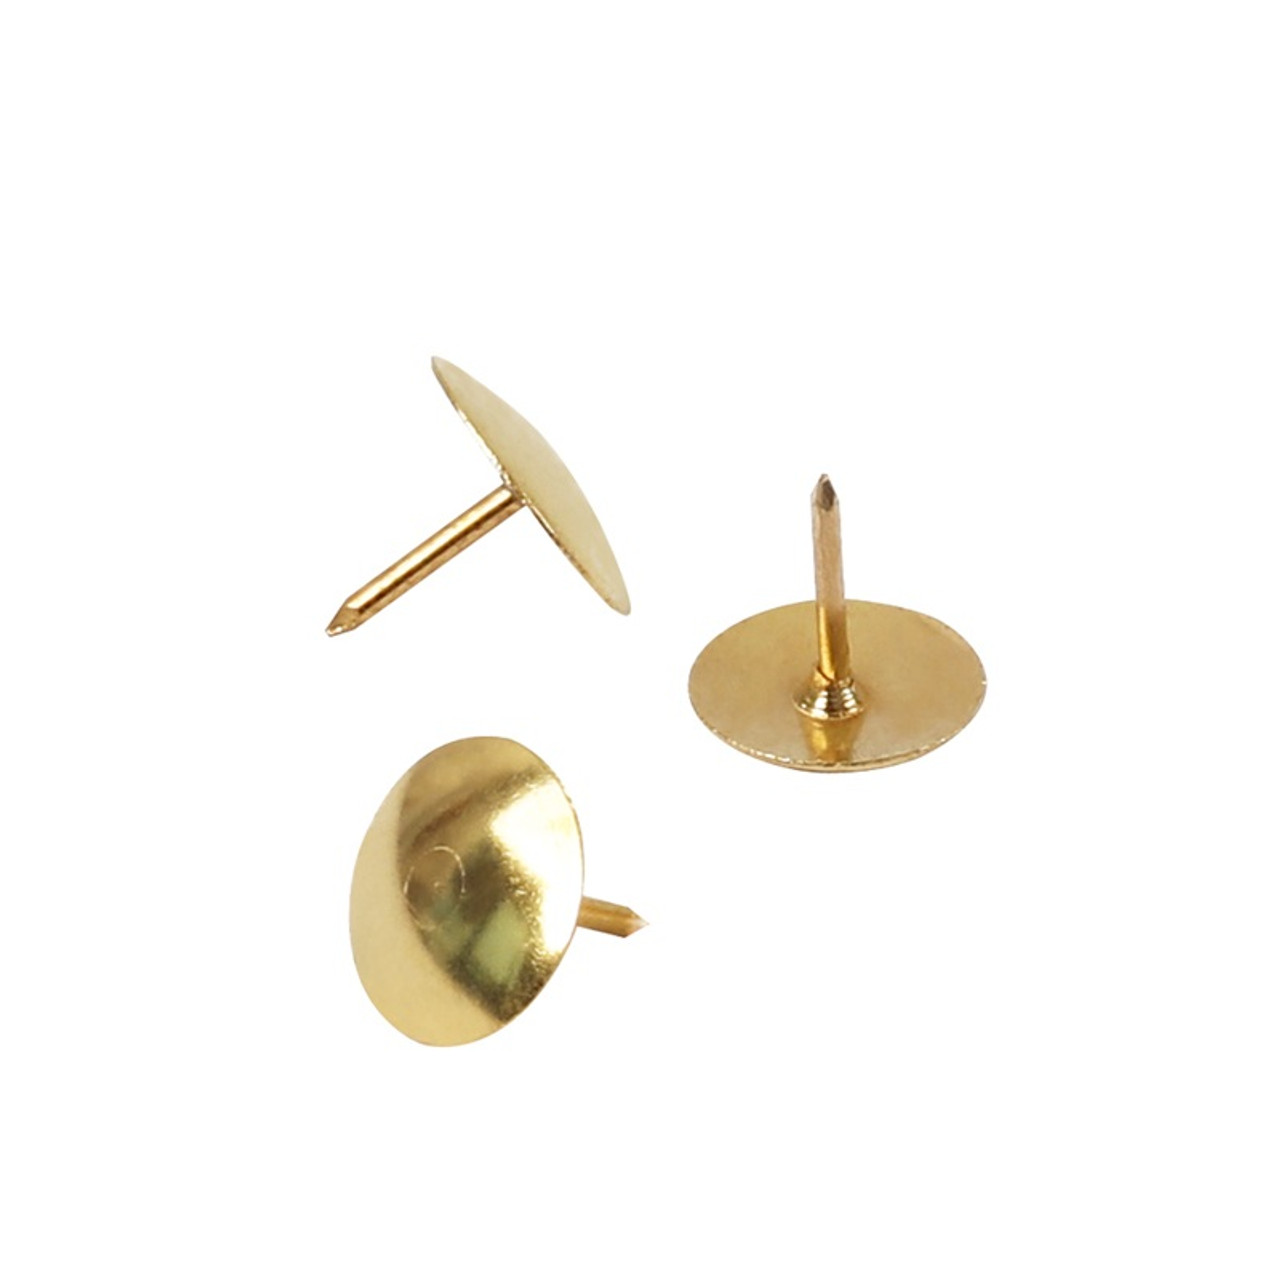 Pack of 50 Golden Thumb Tack Push Pins - Stationery Wholesale